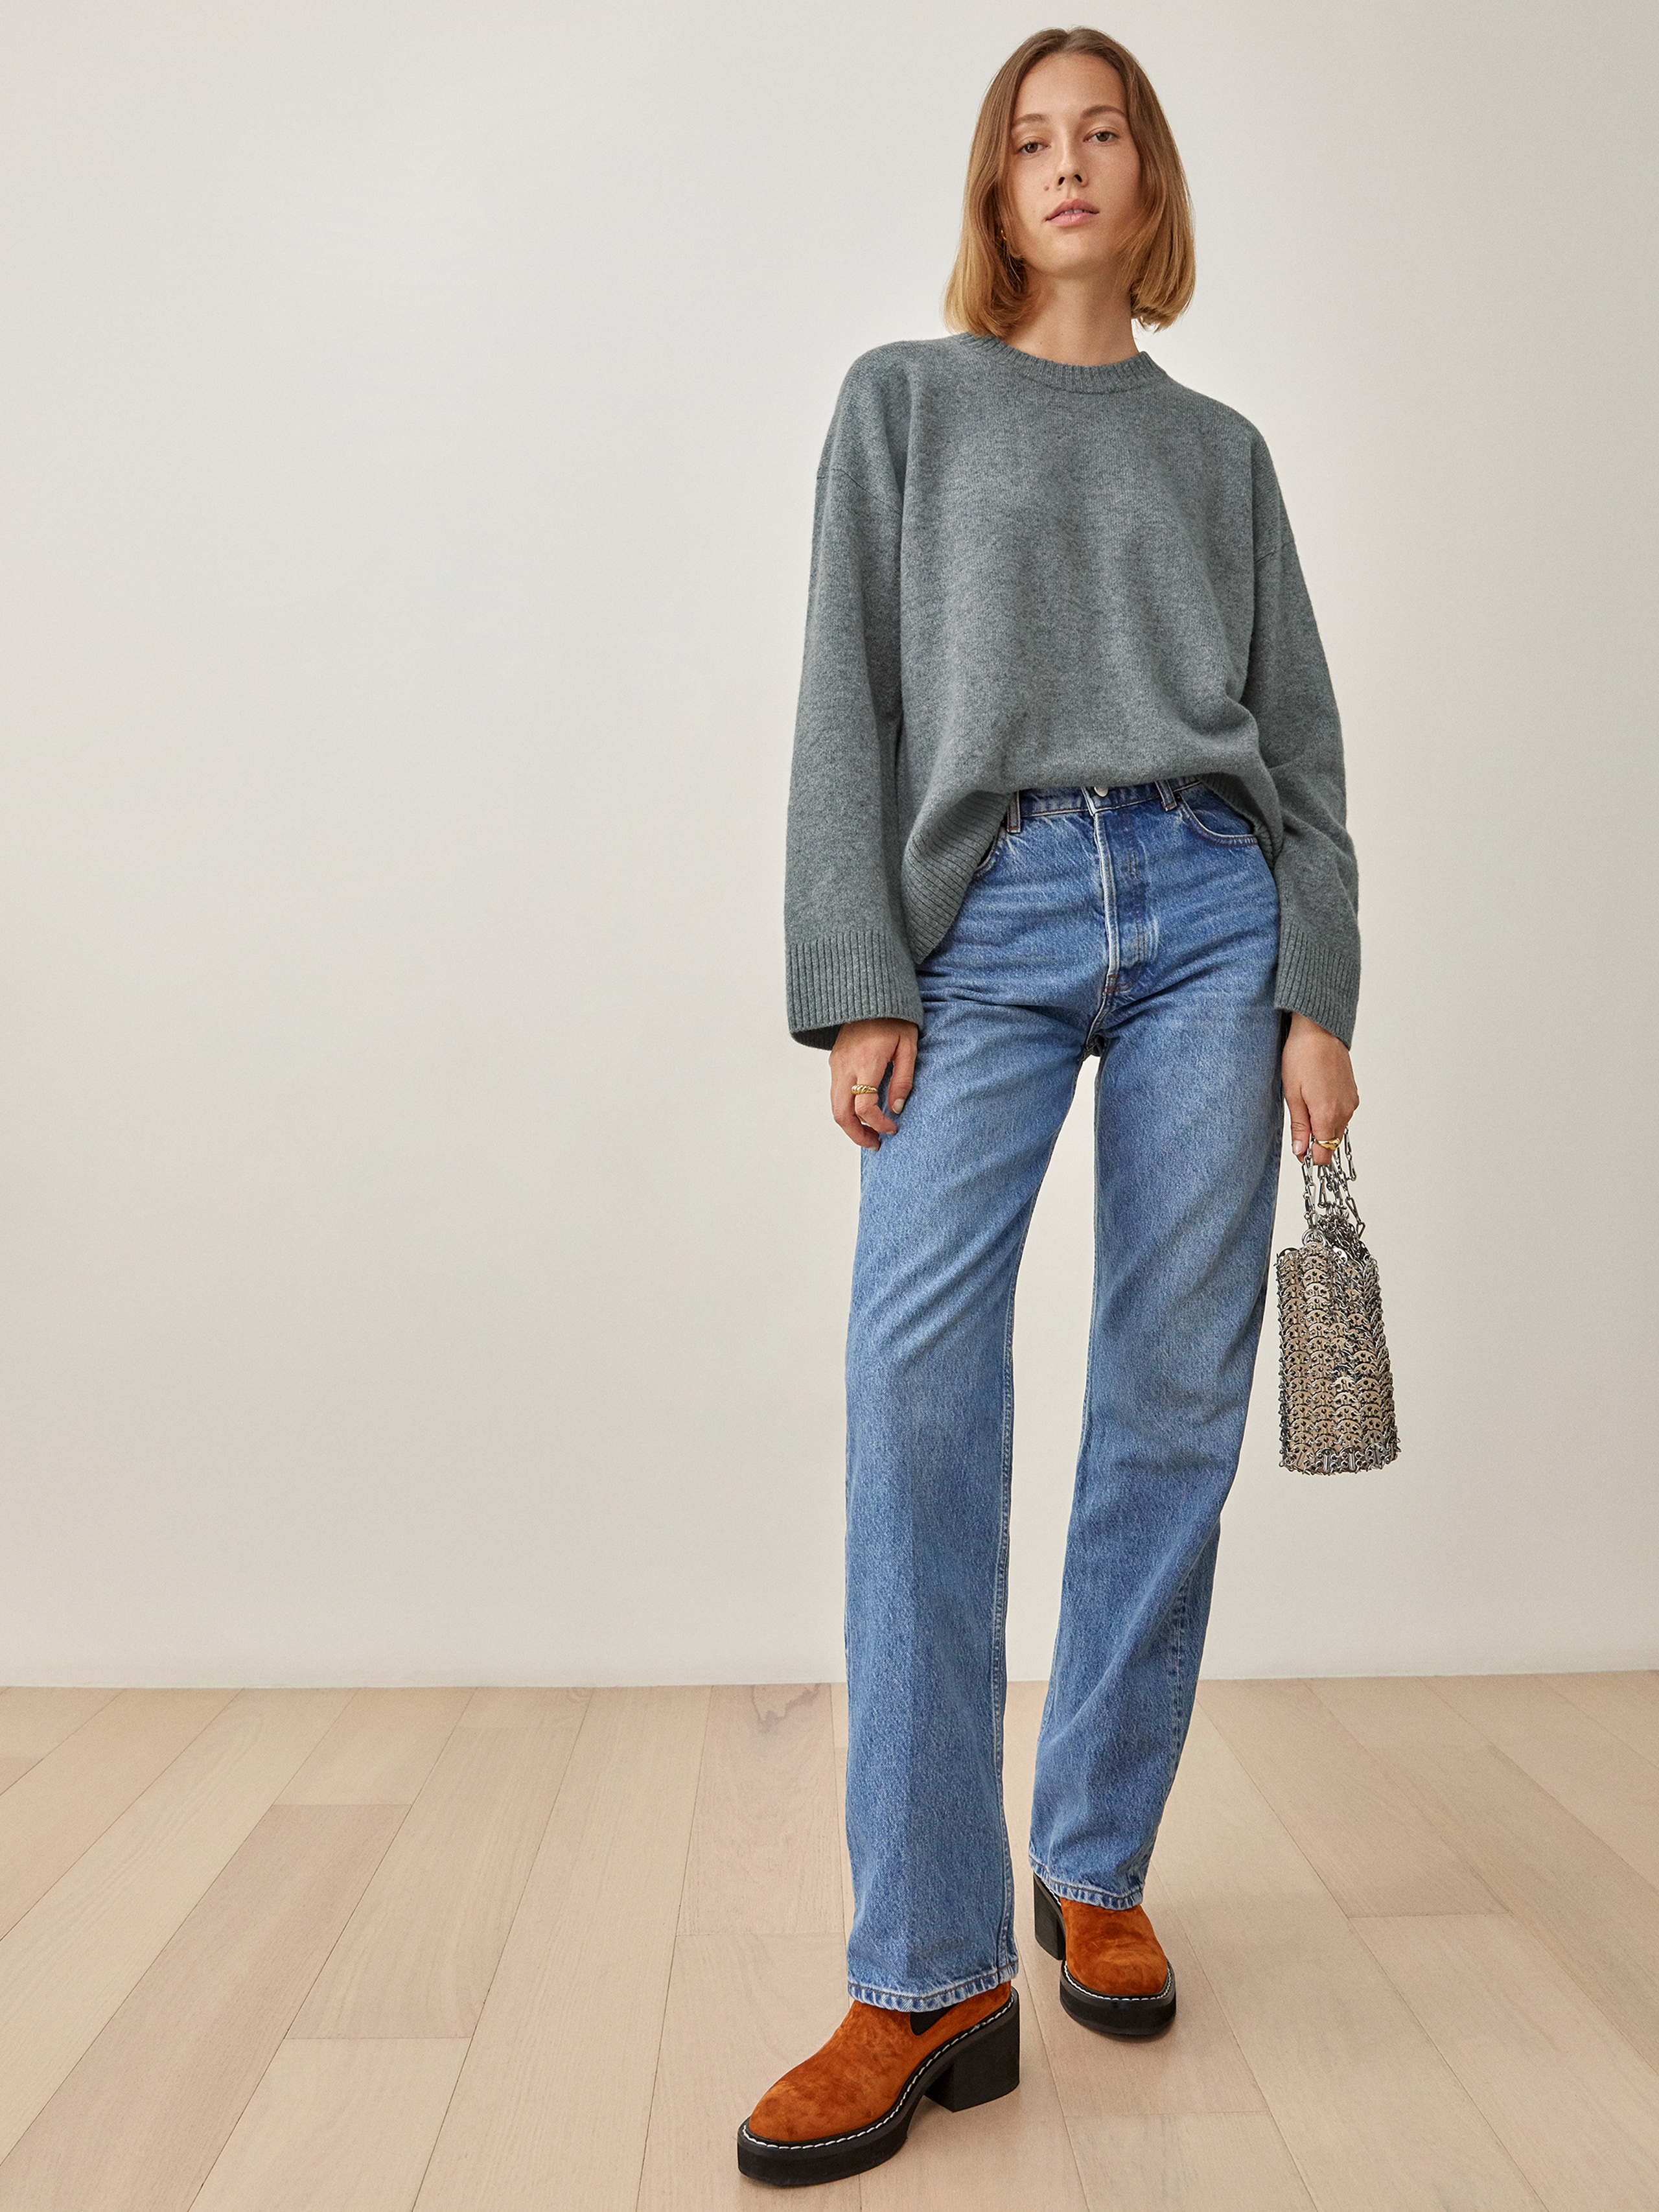 29 Chic Chunky Sweaters That Look Great With Jeans | Who What Wear